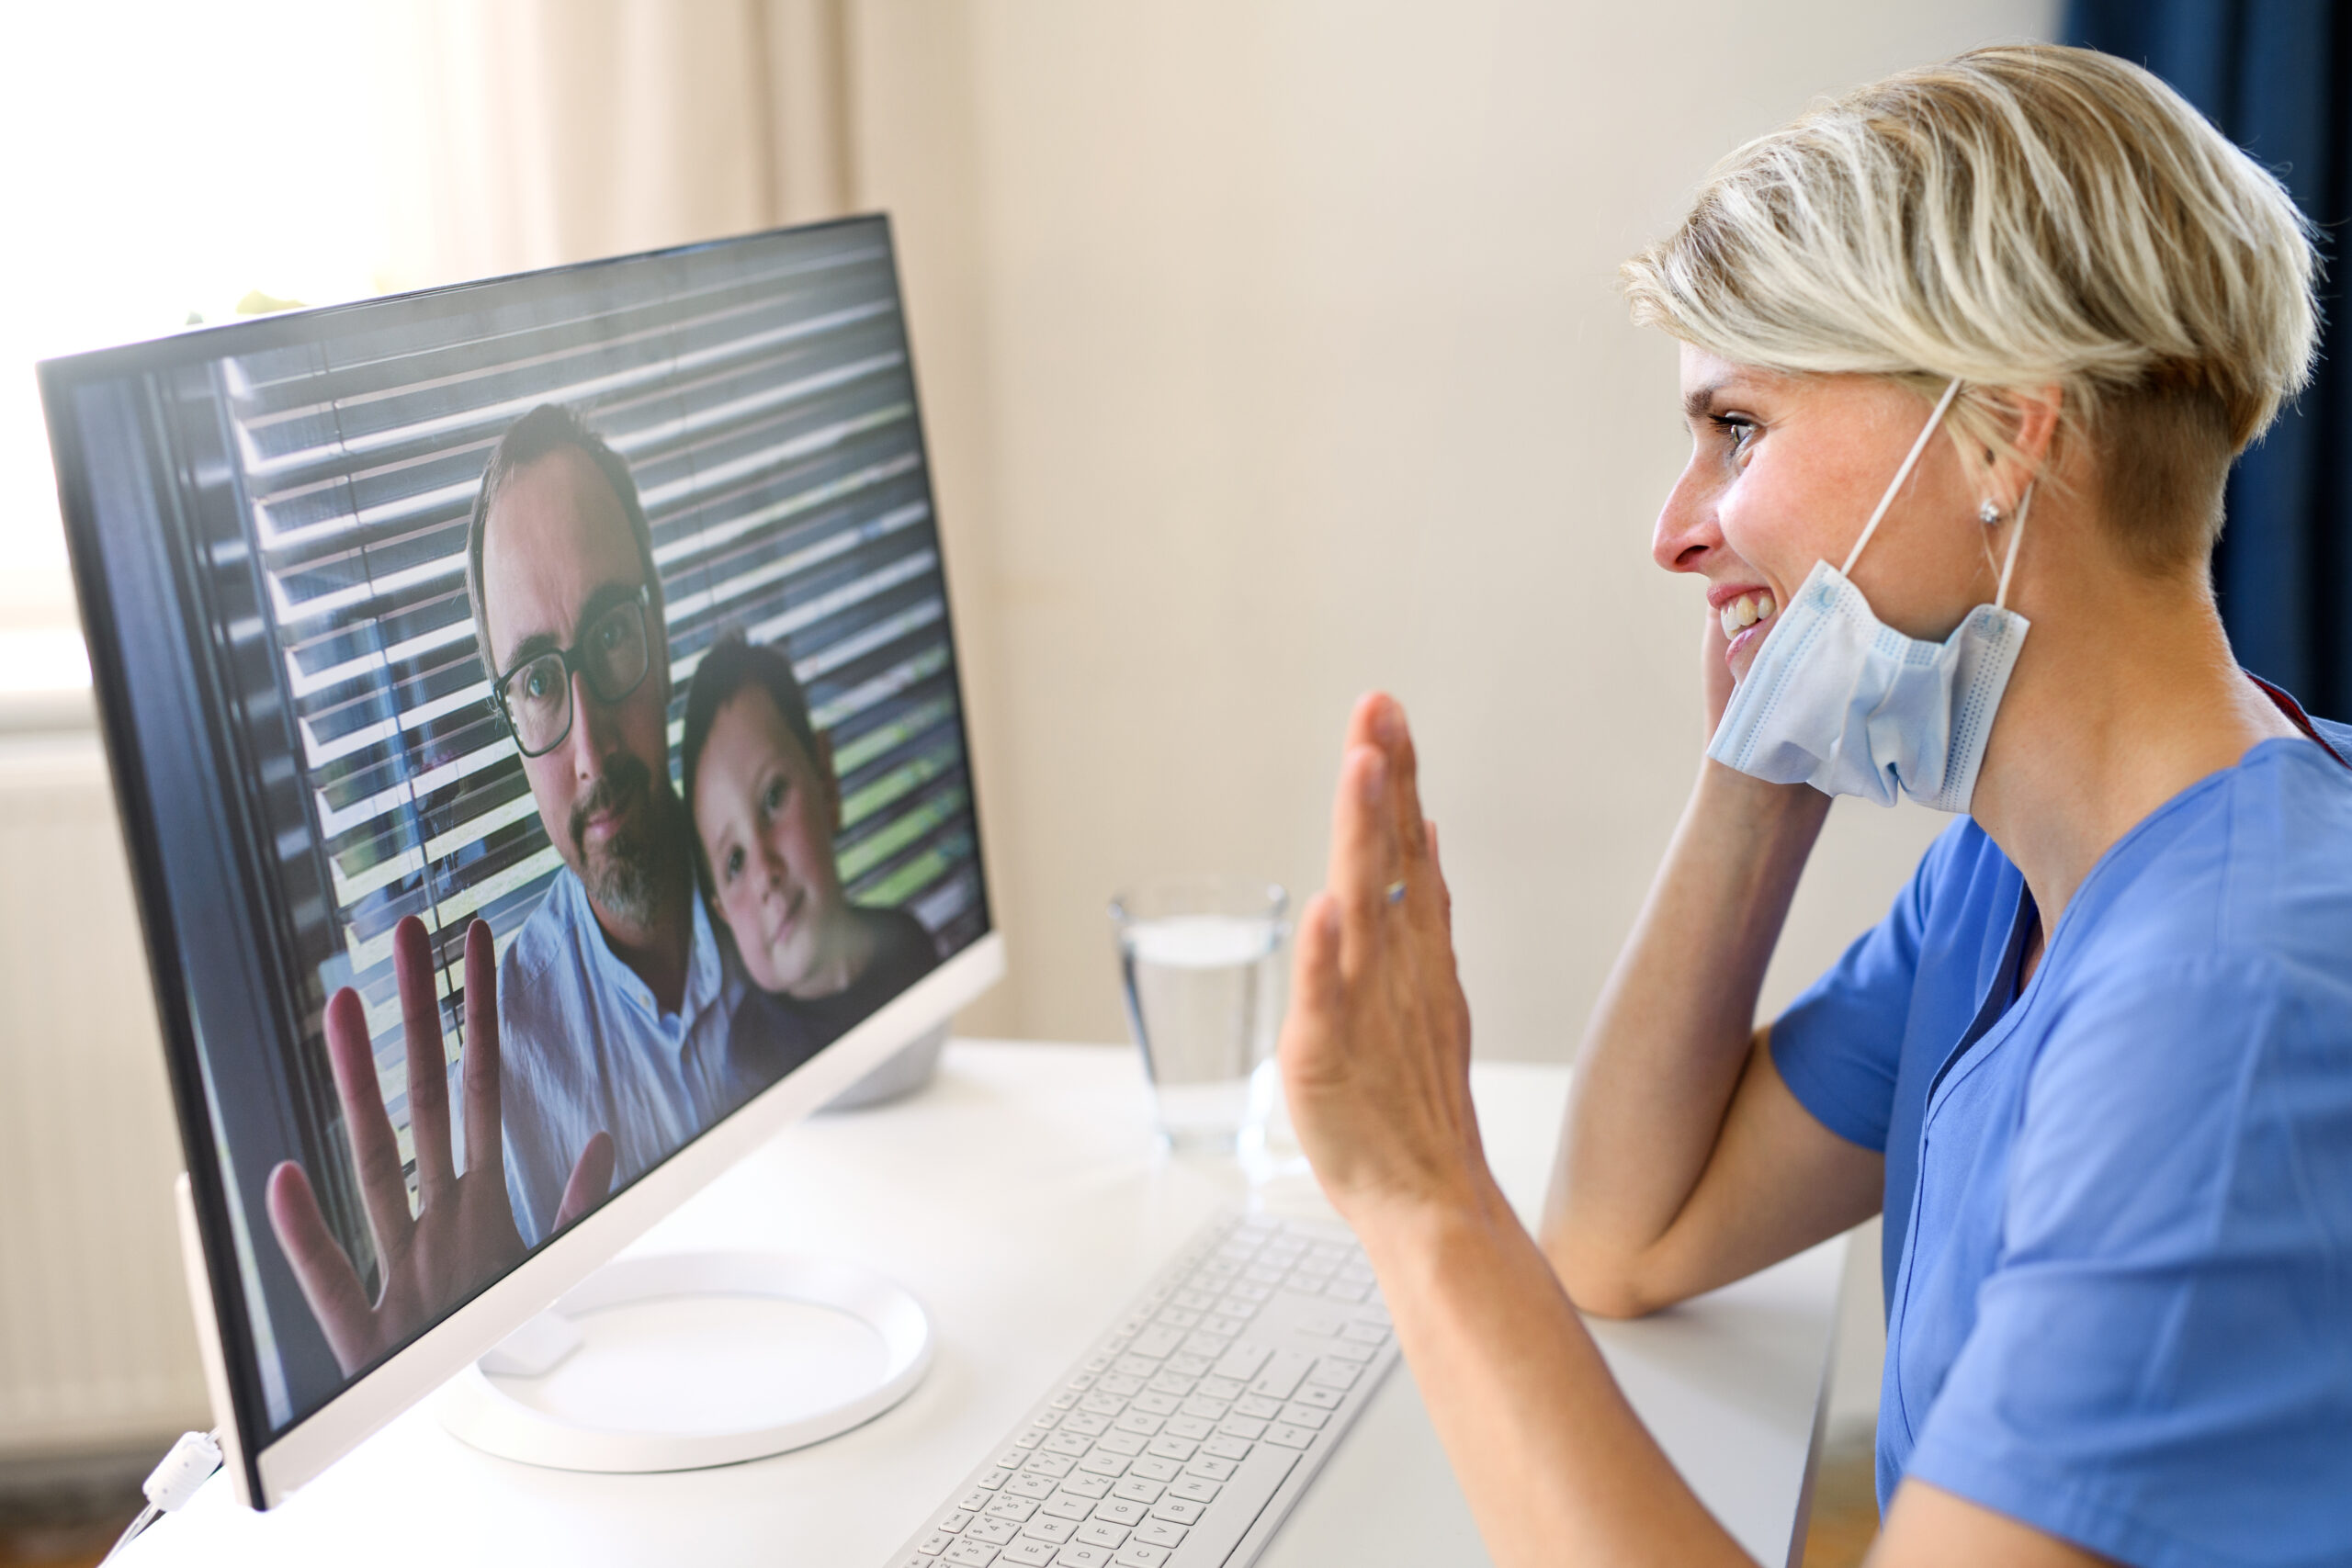 Woman doctor having video call with patients on laptop, online consultation concept.